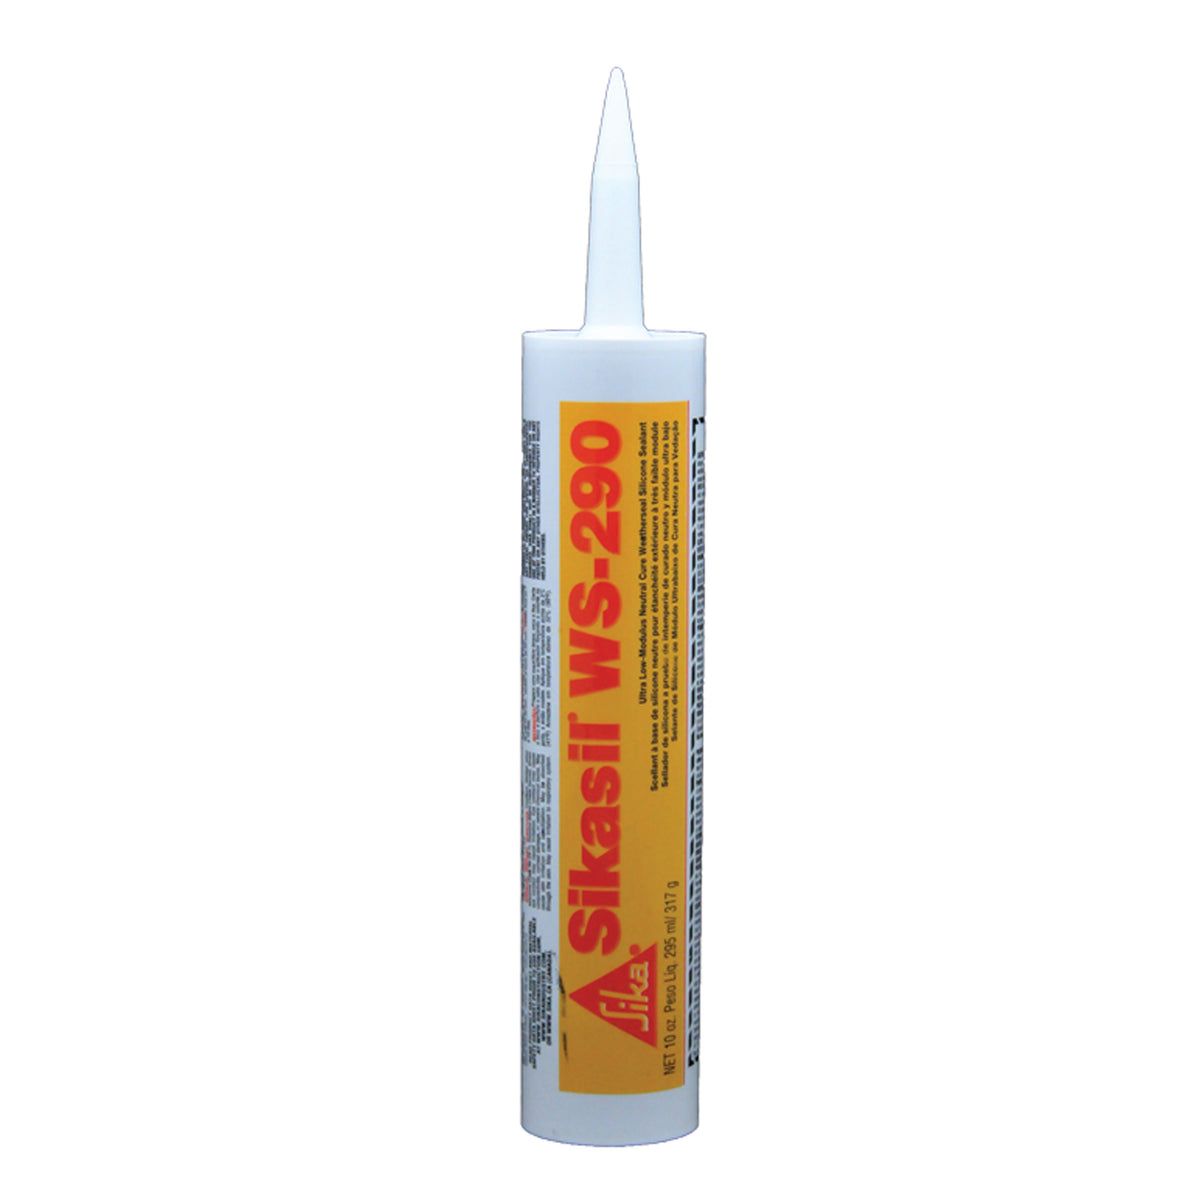 AP Products 017-412304 Sikasil WS-290 Sealant, Colonial White